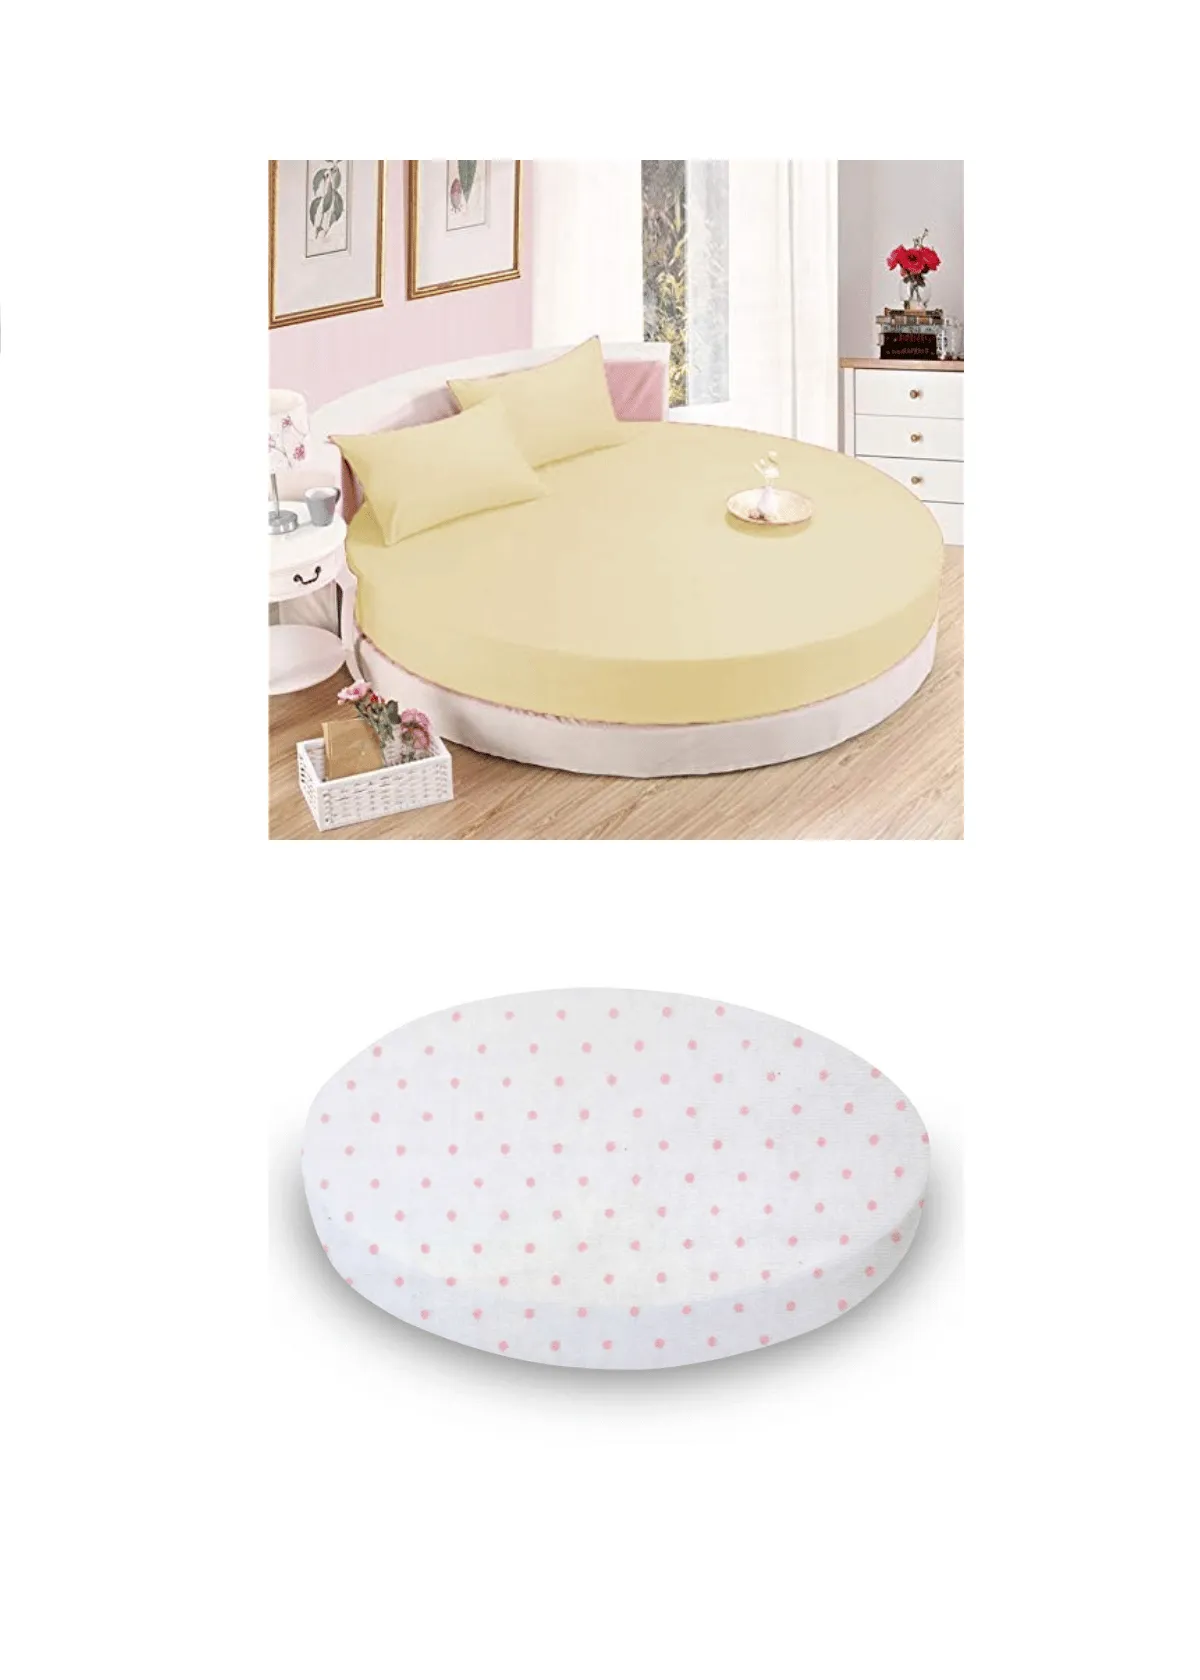 "Round Bed Sheets | Top Classy Beddings For Your Mattress"